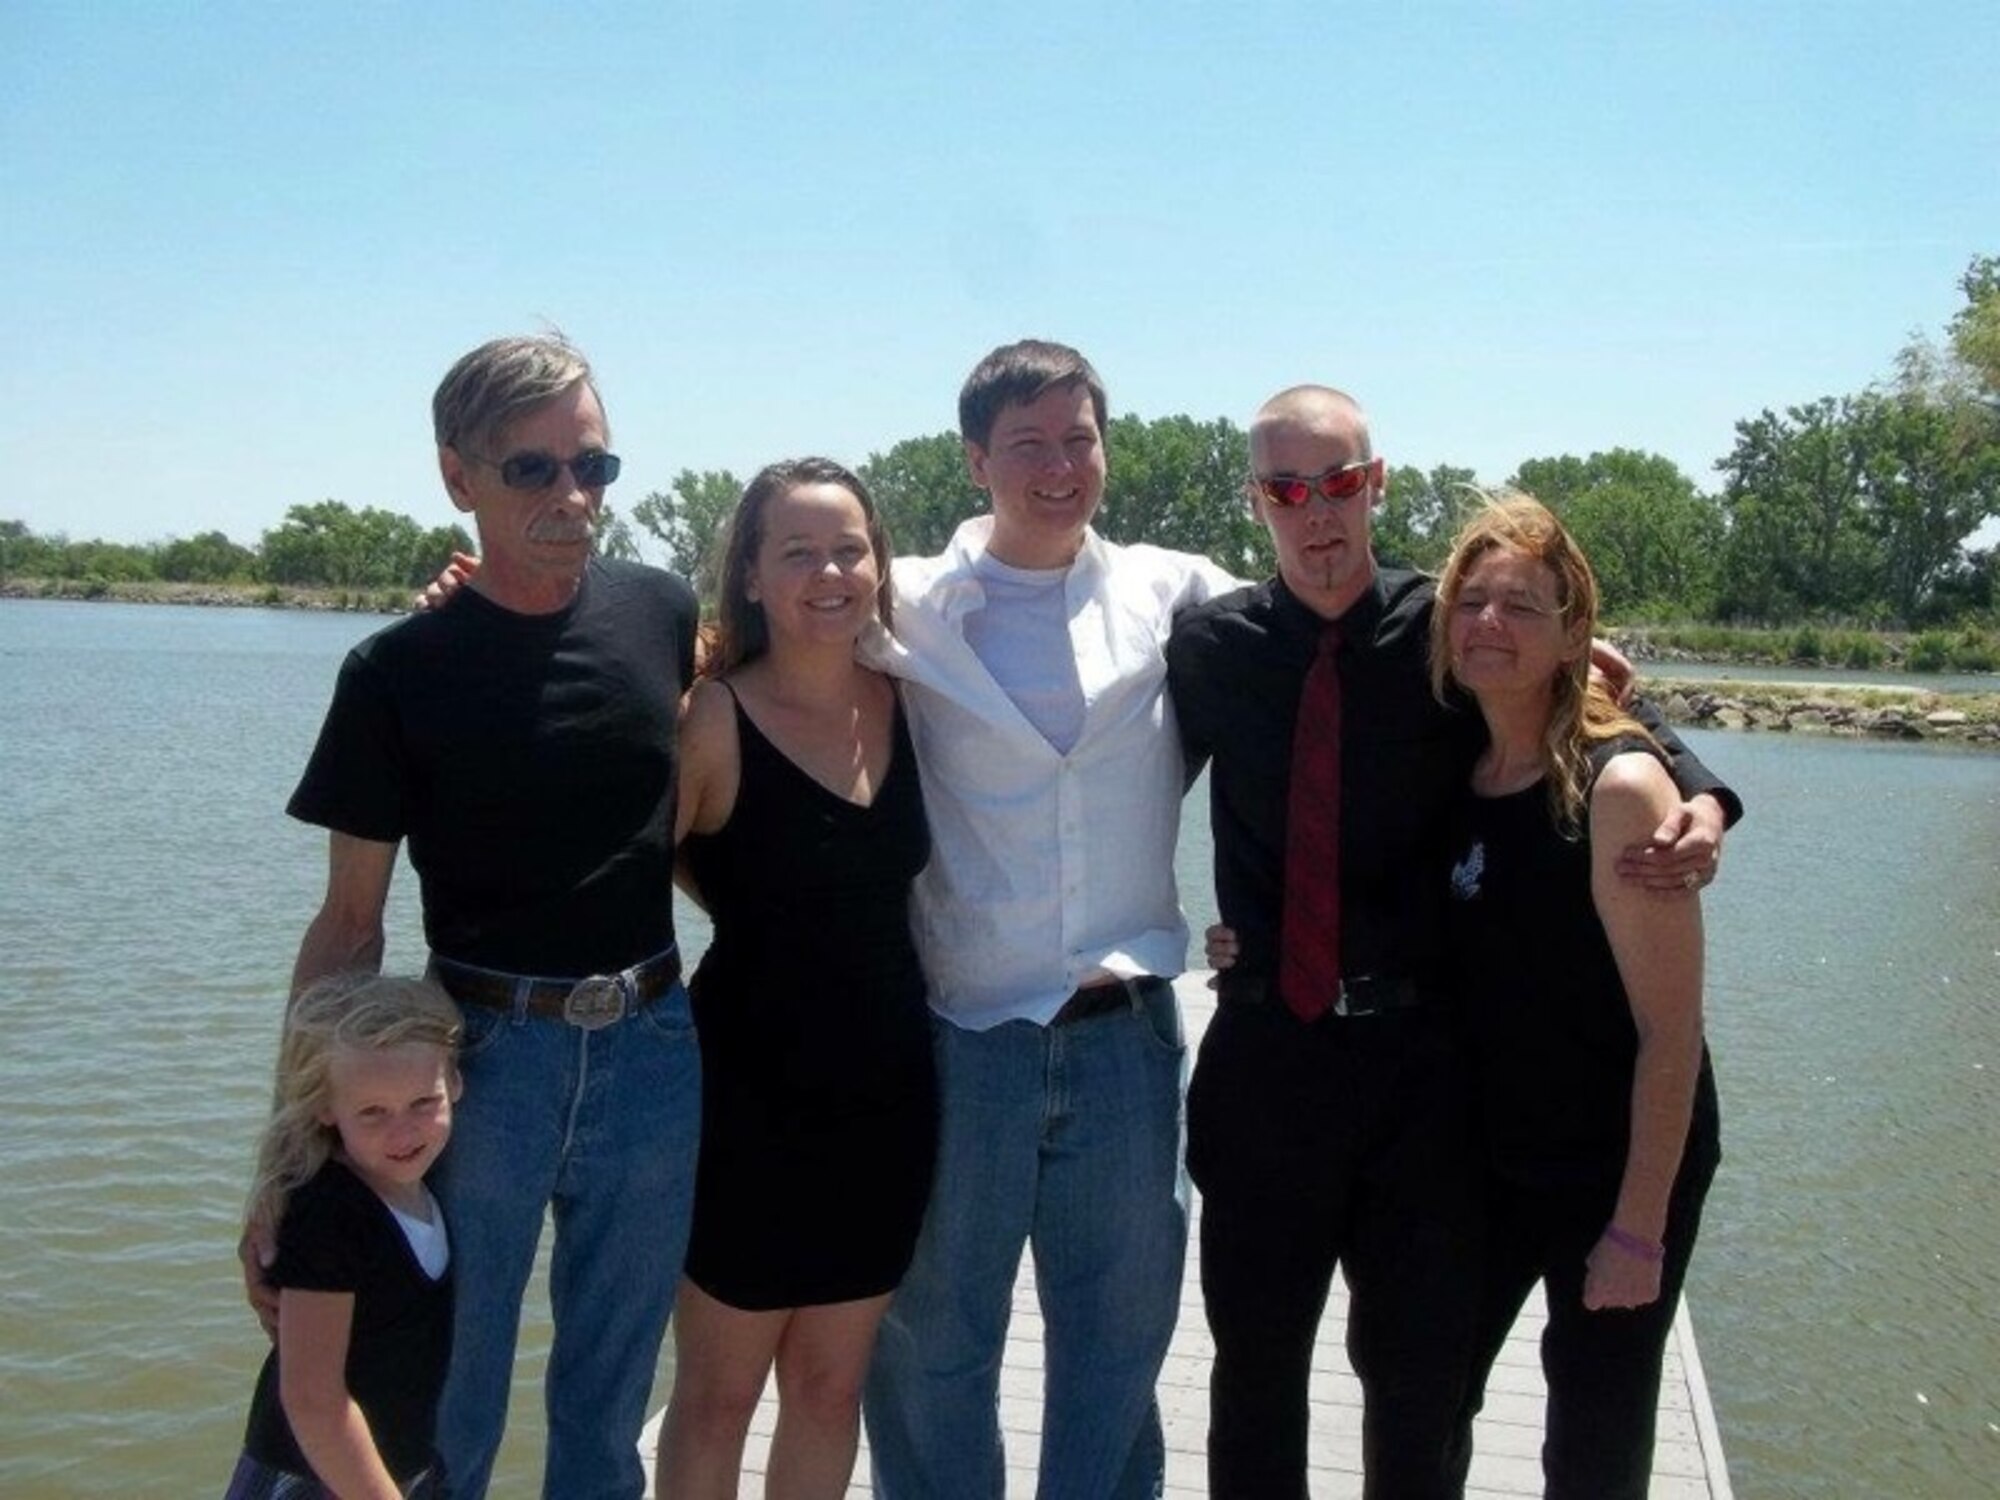 U.S. Air Force Airman 1st Class Daniel Meyer, 55th Aircraft Maintenance Squadron, stands in the center of his family for a photo after losing a significant amount of weight in order to reach his goal of joining the United States Air Force.  His father passed away from cancer not long after the photo was taken. (Courtesy photo) 